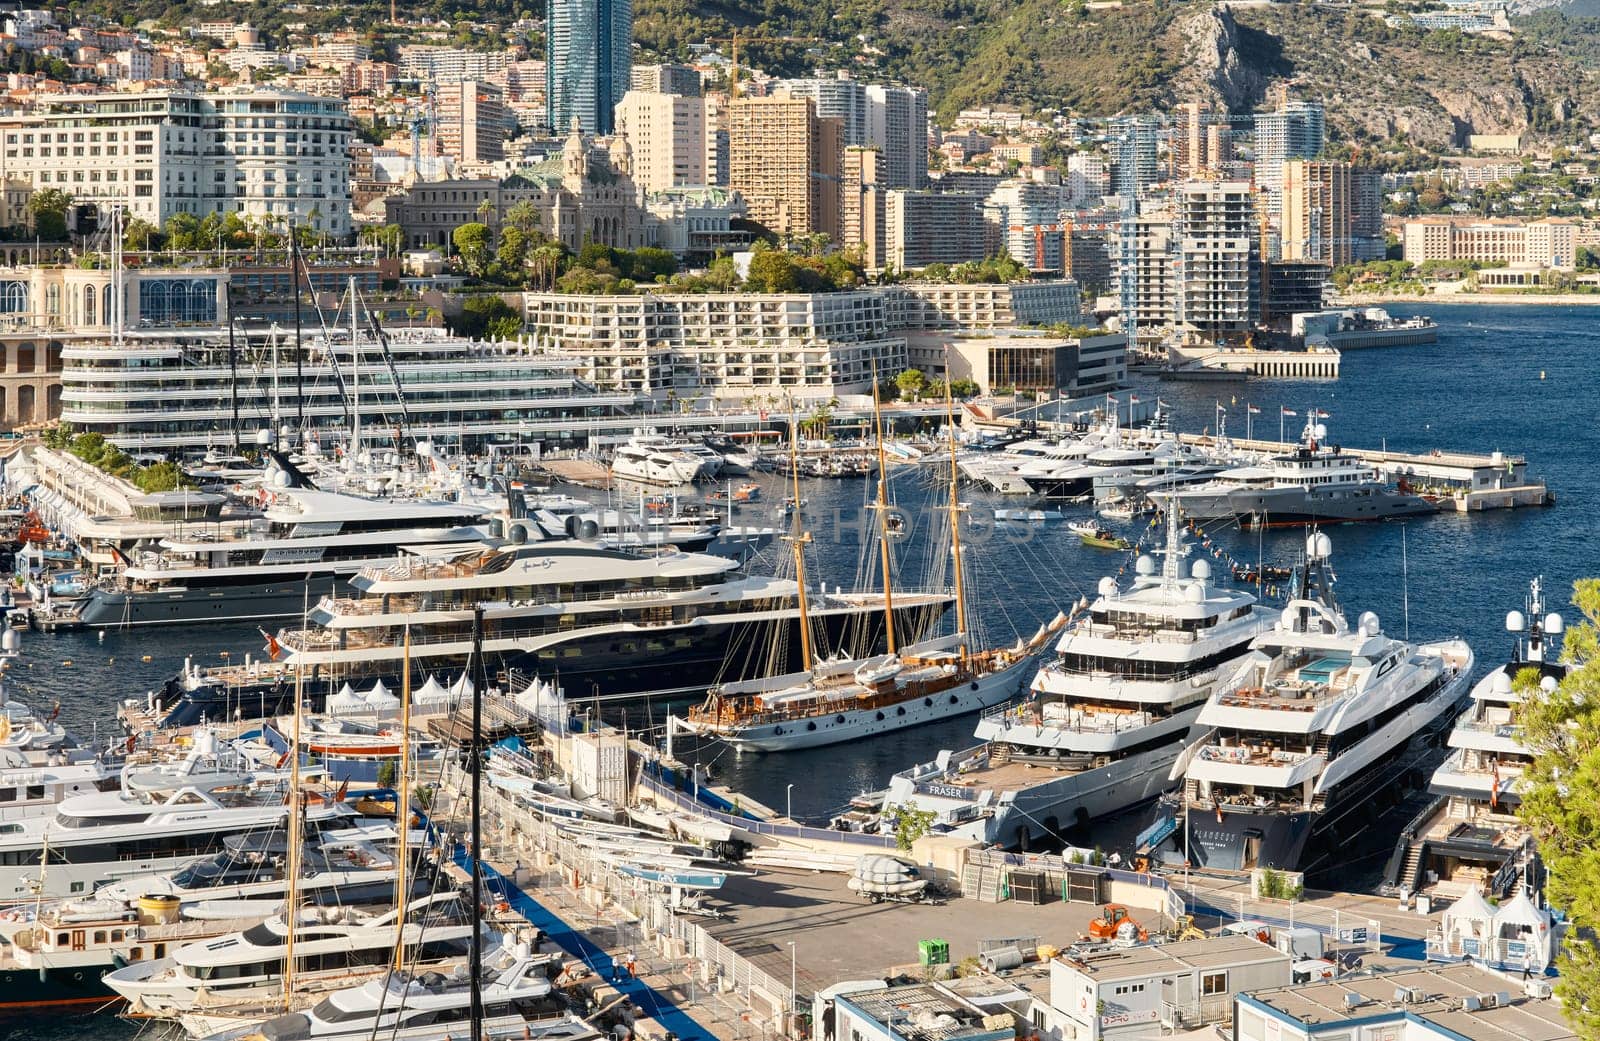 Monaco, Monte Carlo, 28 September 2022 - Top view of the famous yacht show, exhibition of luxury mega yachts, the most expensive boats for the richest people around the world, yacht brokers by vladimirdrozdin